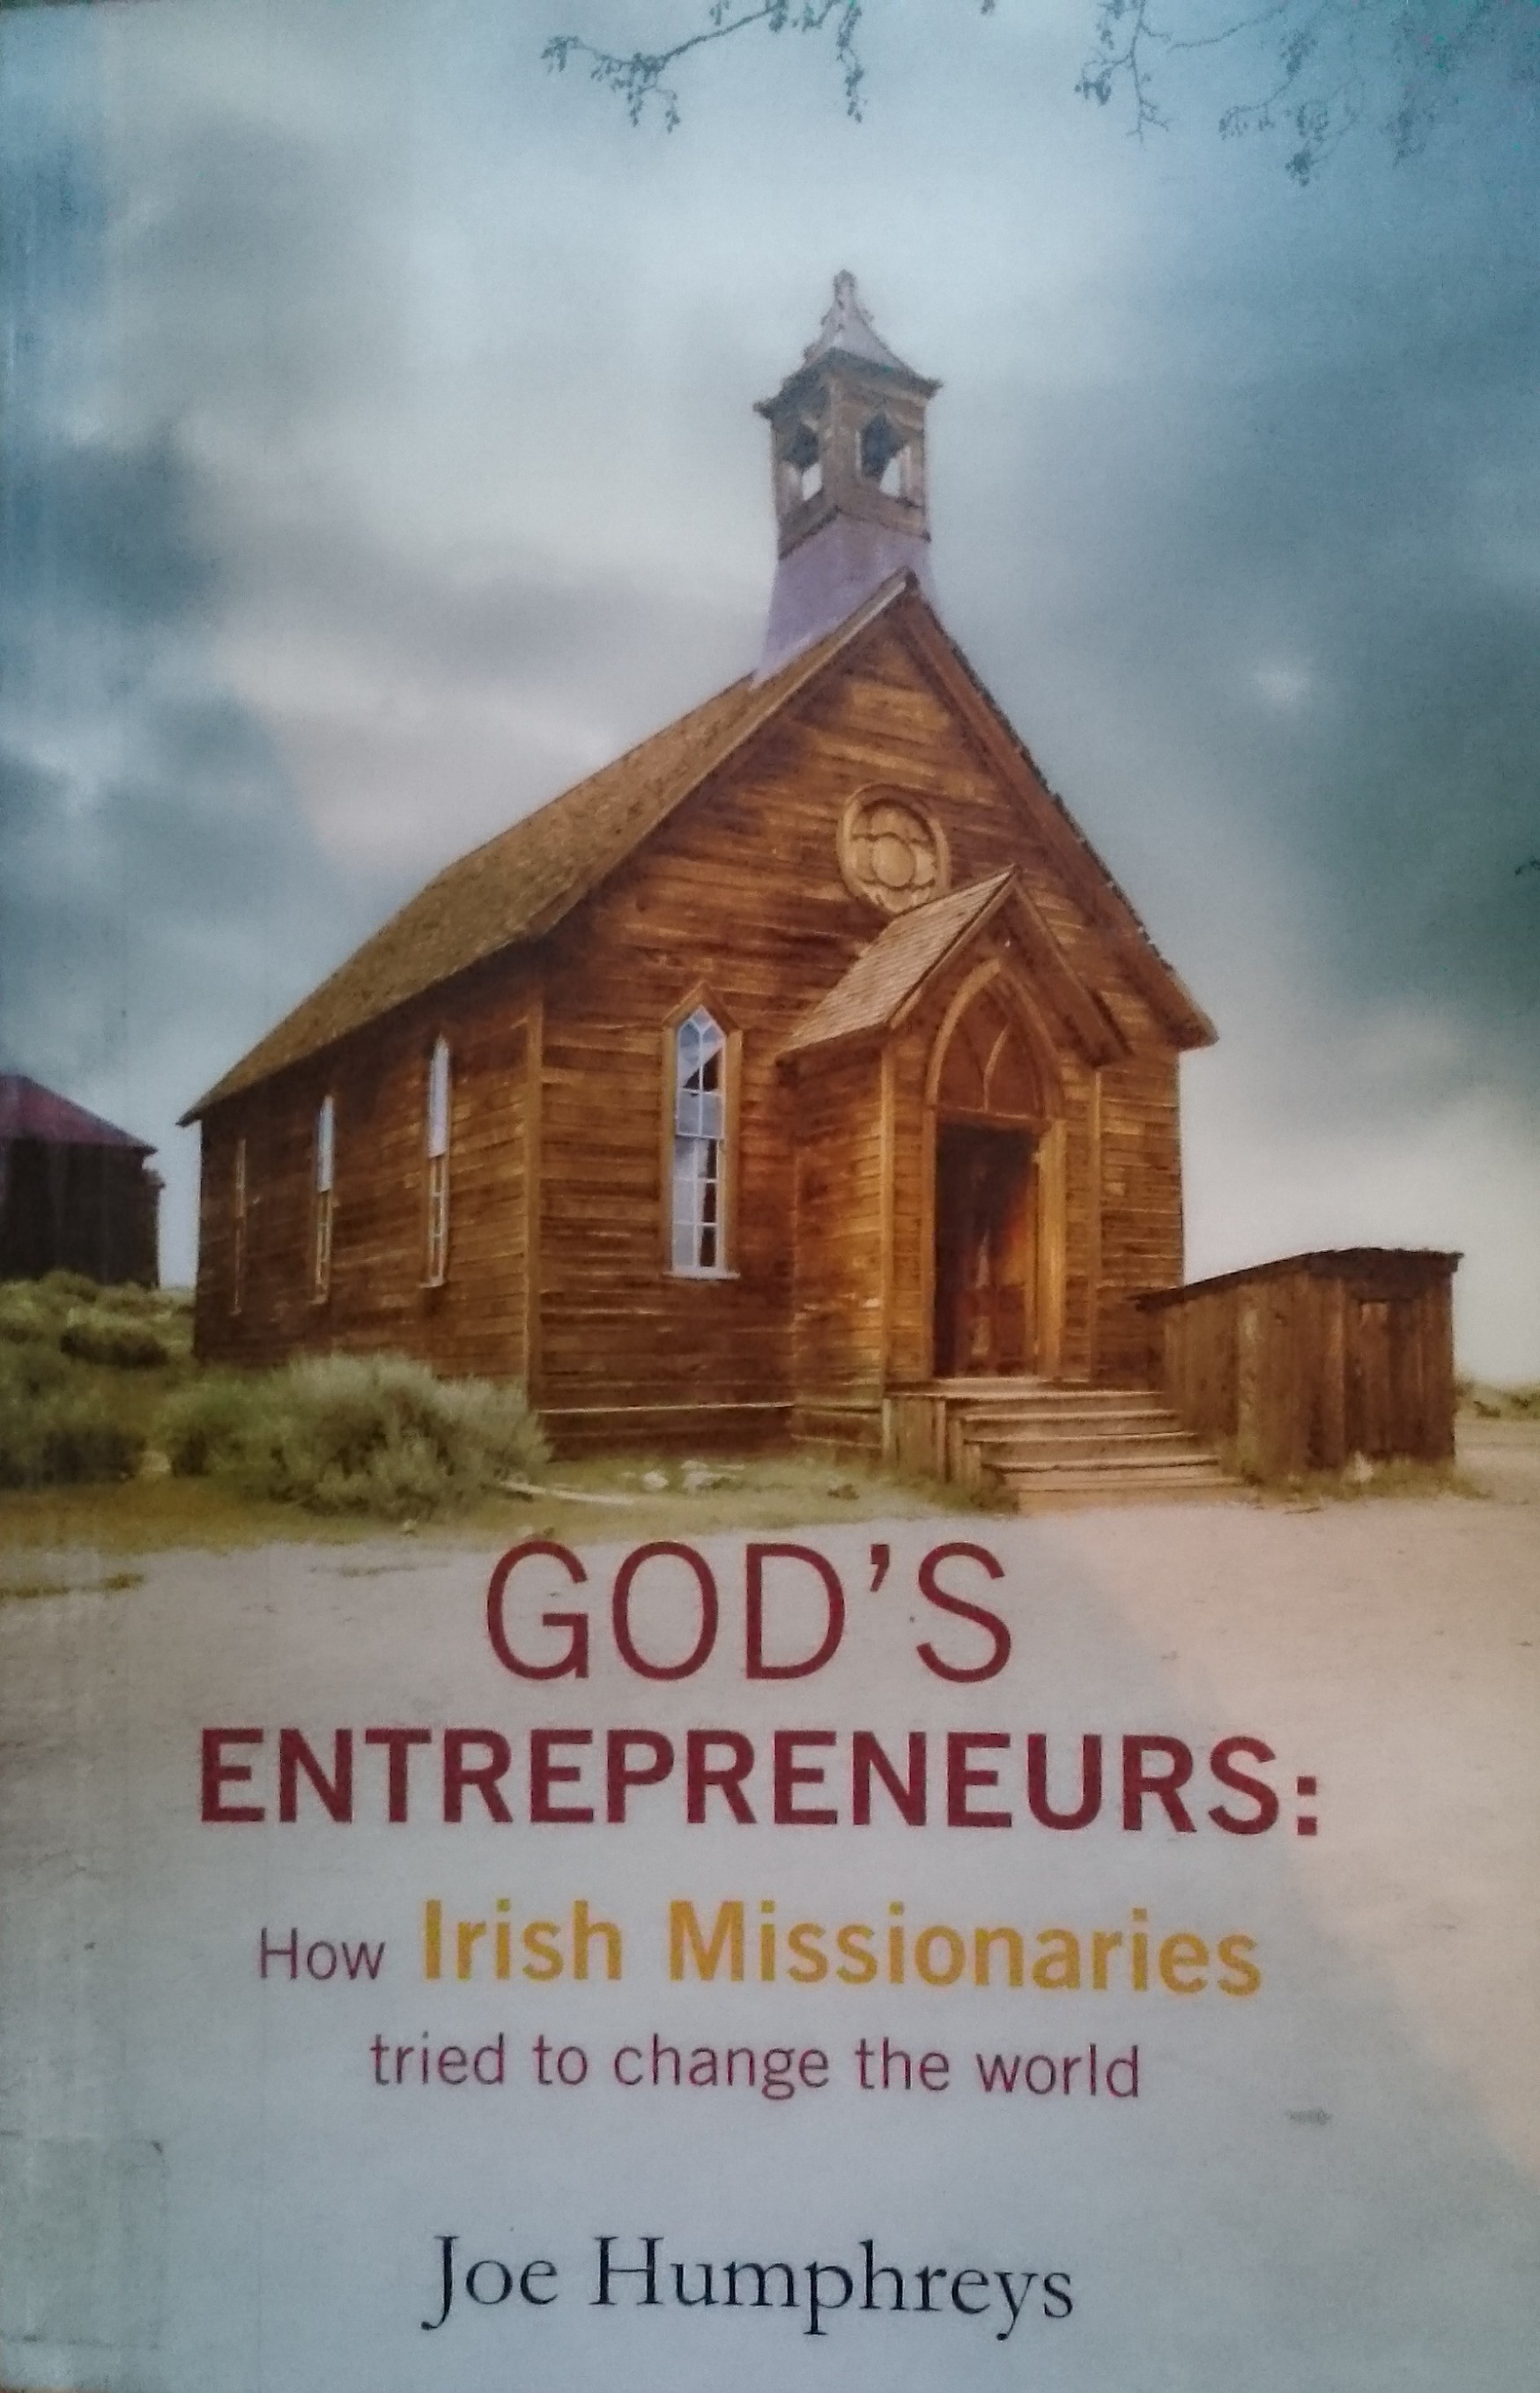 God's Entrepreneurs: How Irish Missionaries Tried to Change the World